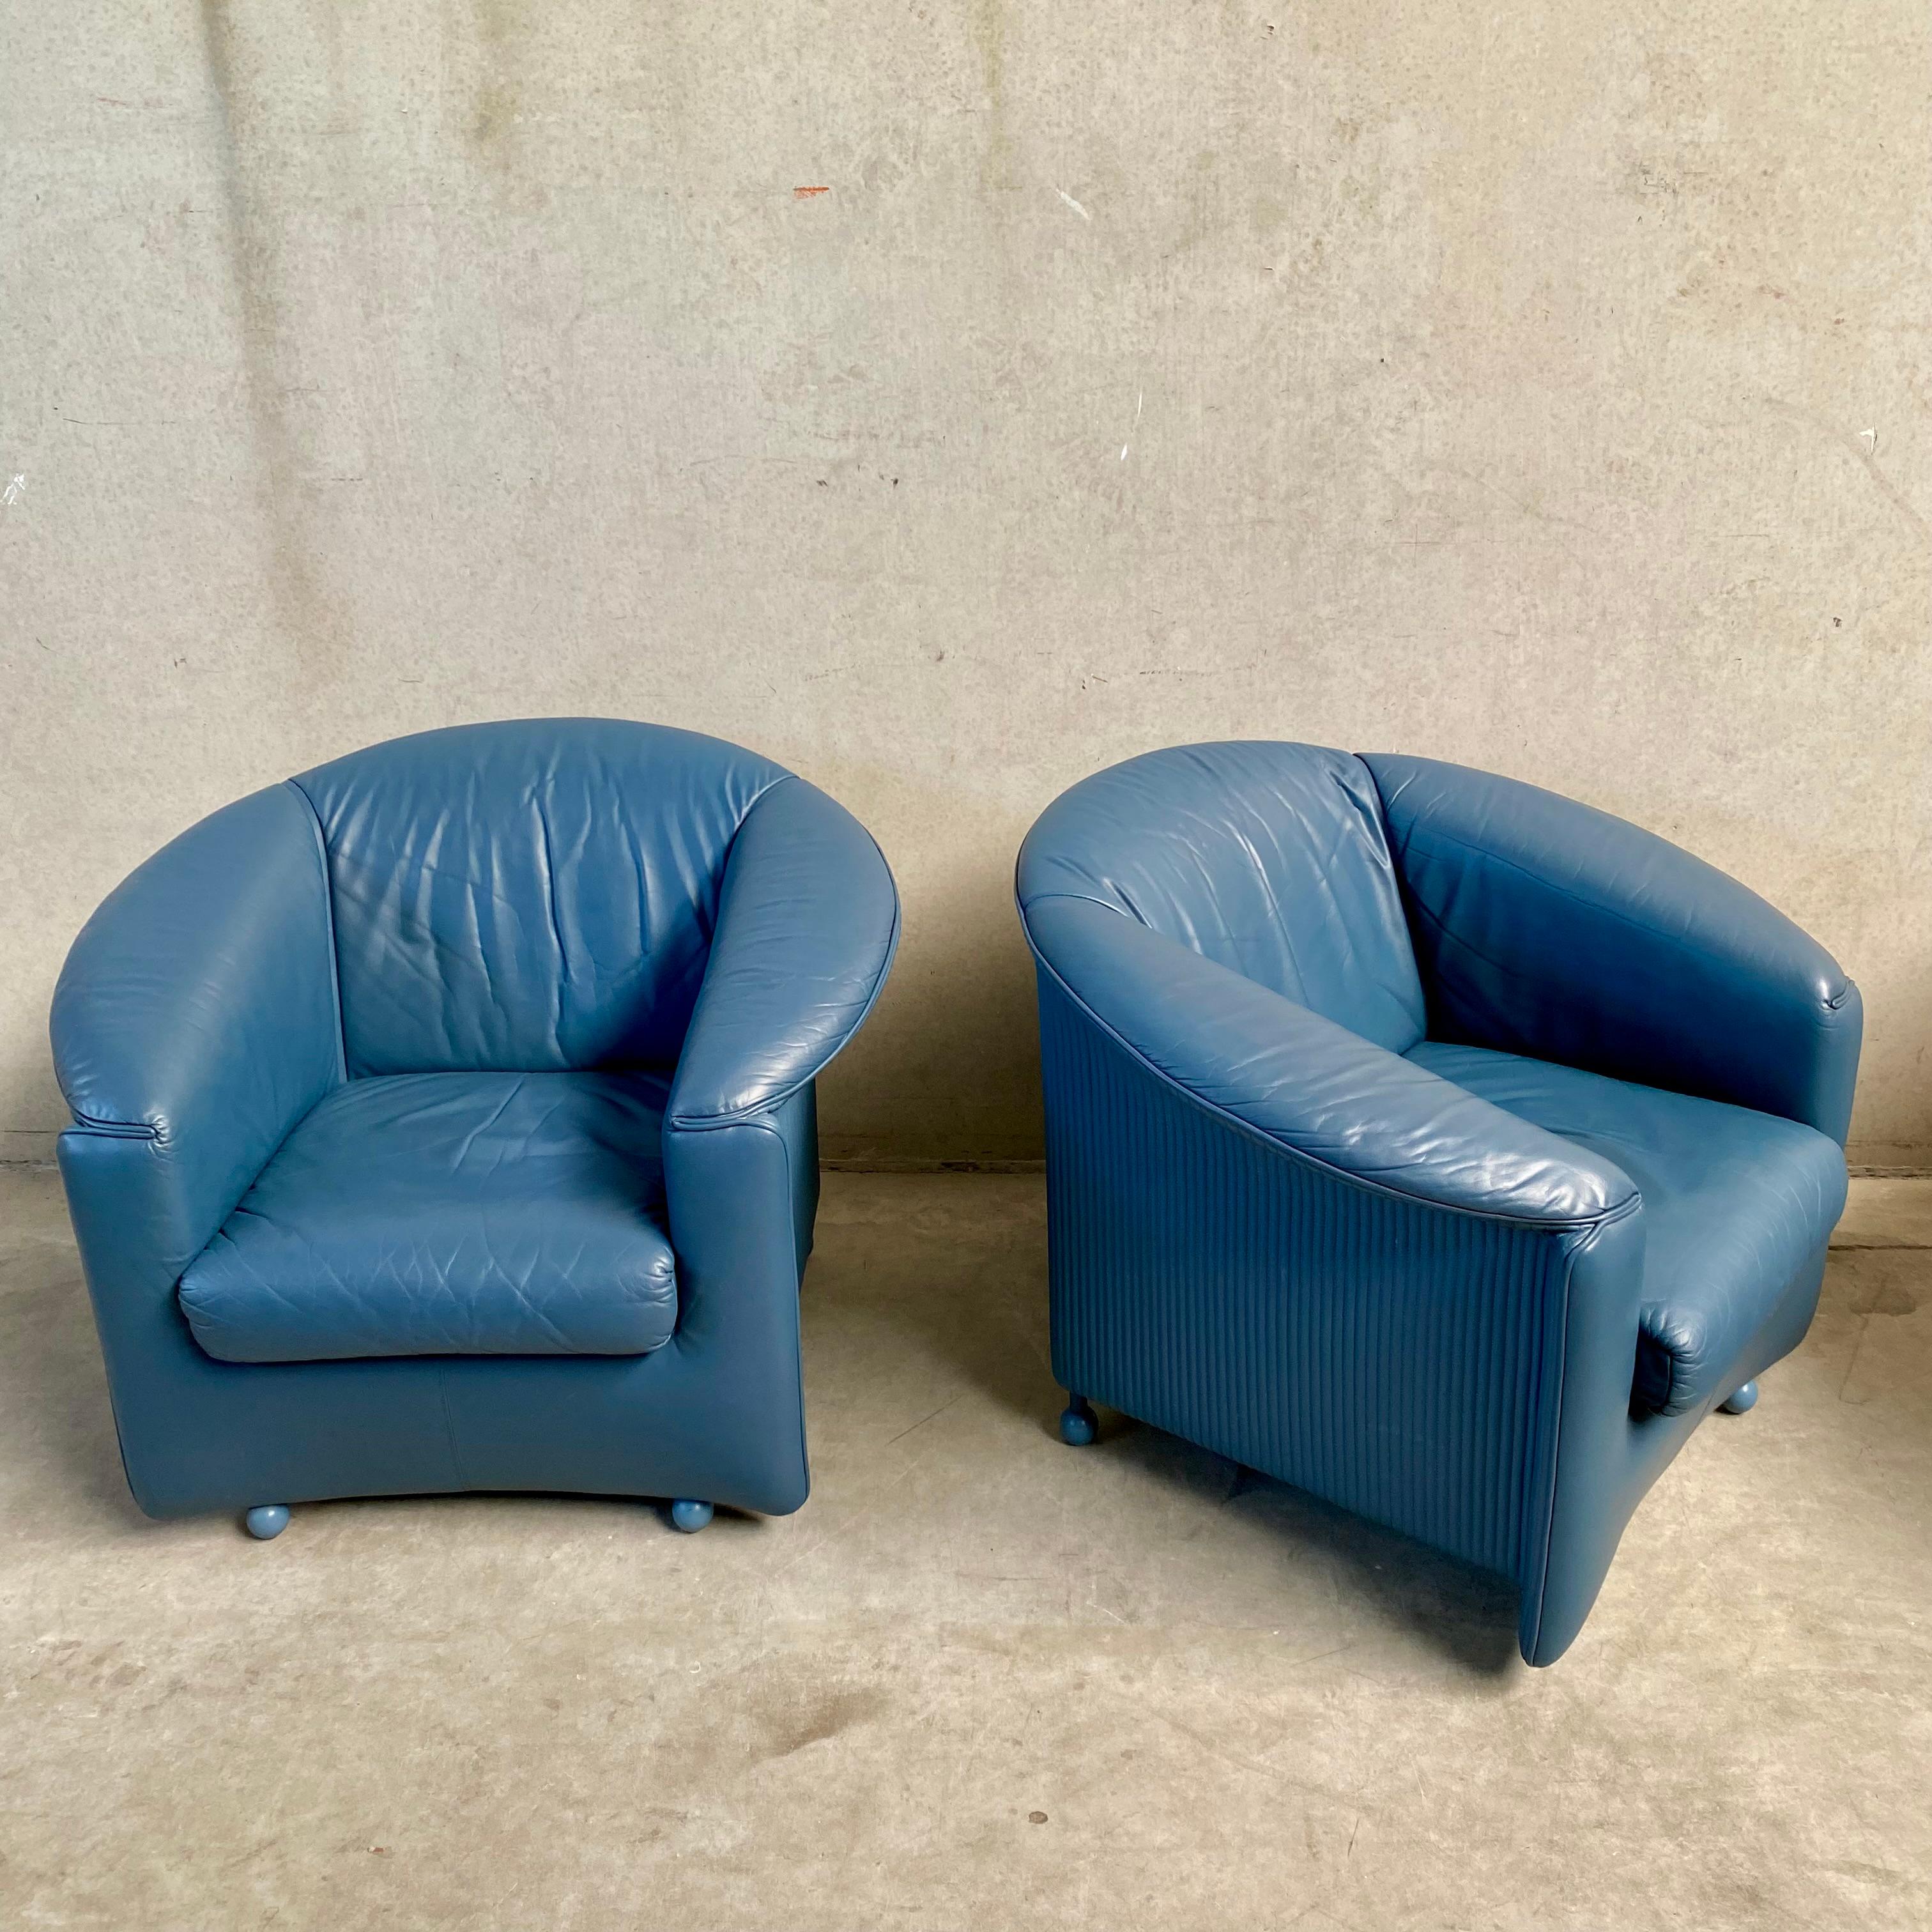 Set of 2 Vintage Leather Arm Chairs by Paolo Piva for Wittmann, Austria 1980s For Sale 4